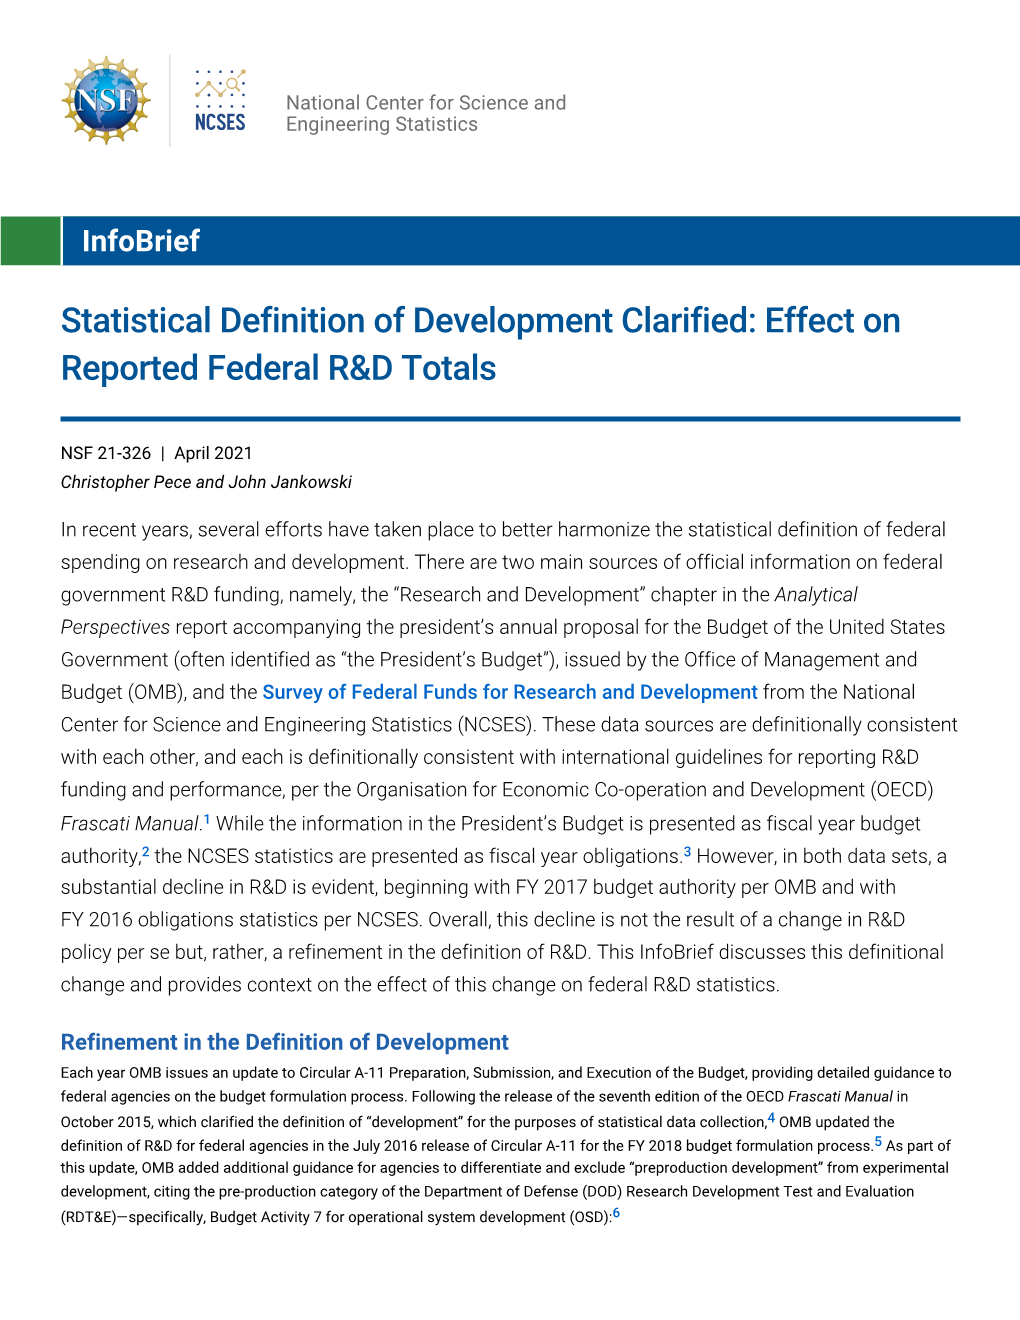 NSF 21-326 Statistical Definition of Development Clarified: Effect on Reported Federal R&D Totals